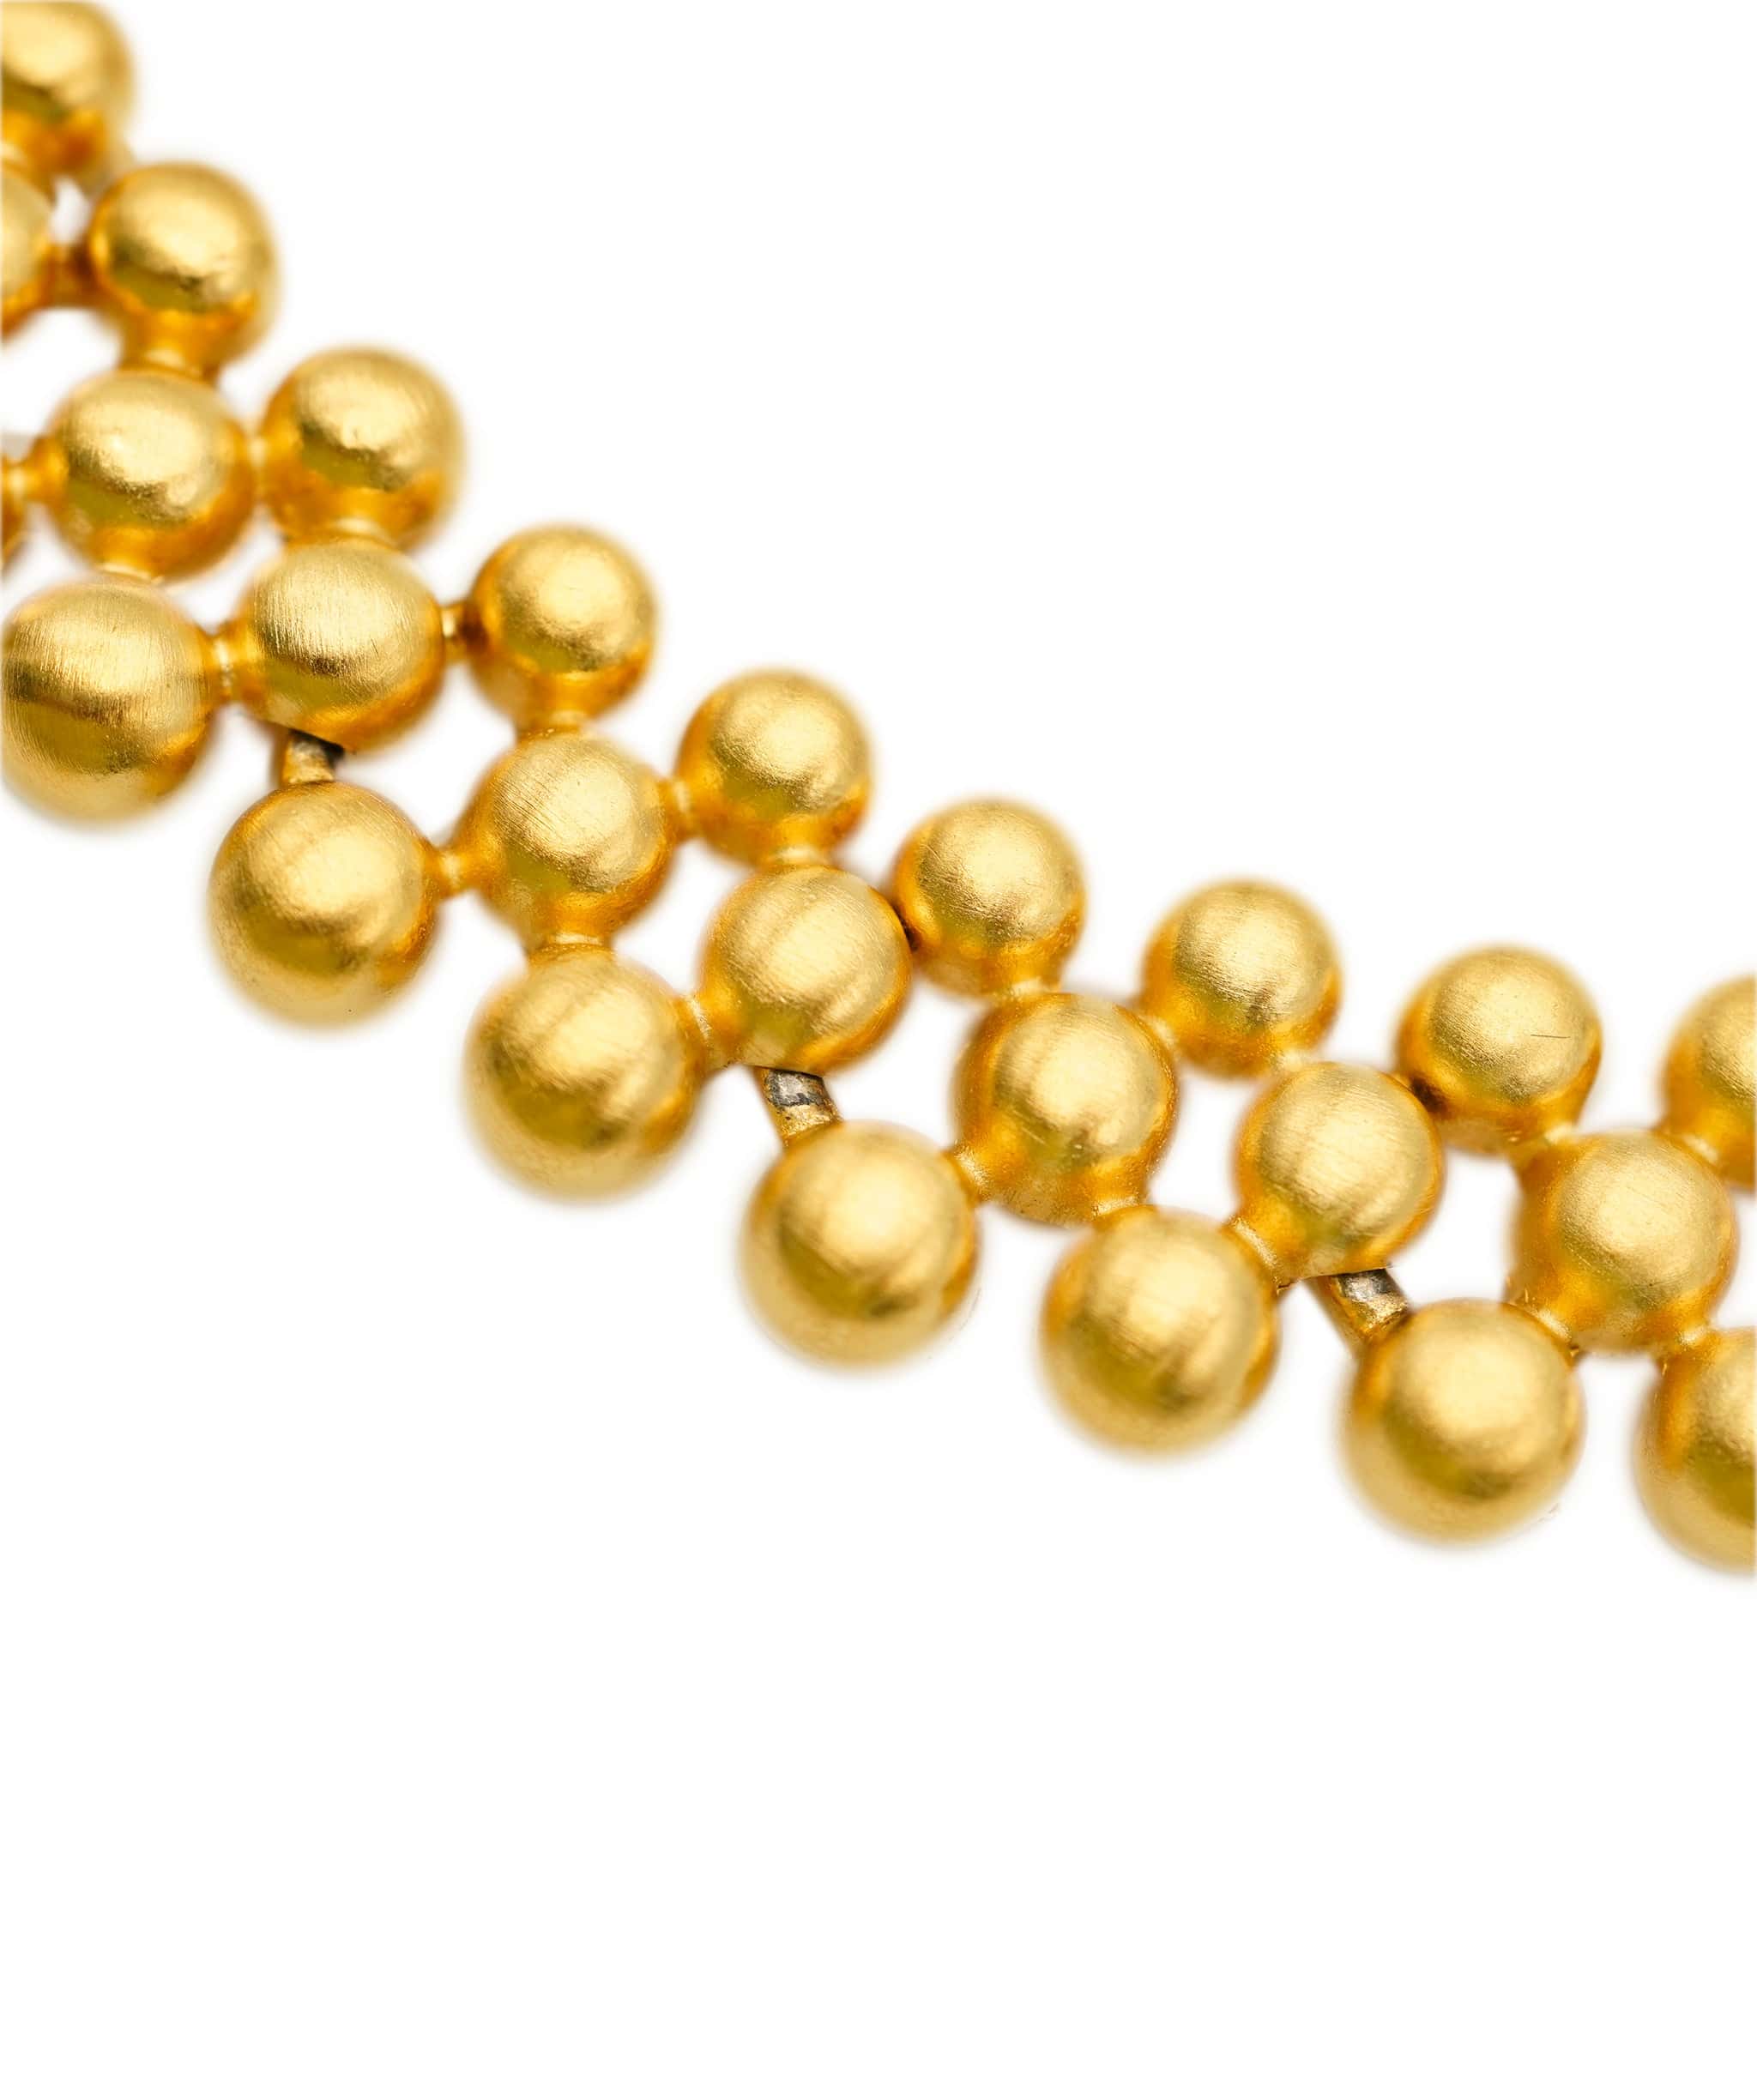 Givenchy Givenchy gold studs 3 row necklace AEL1134